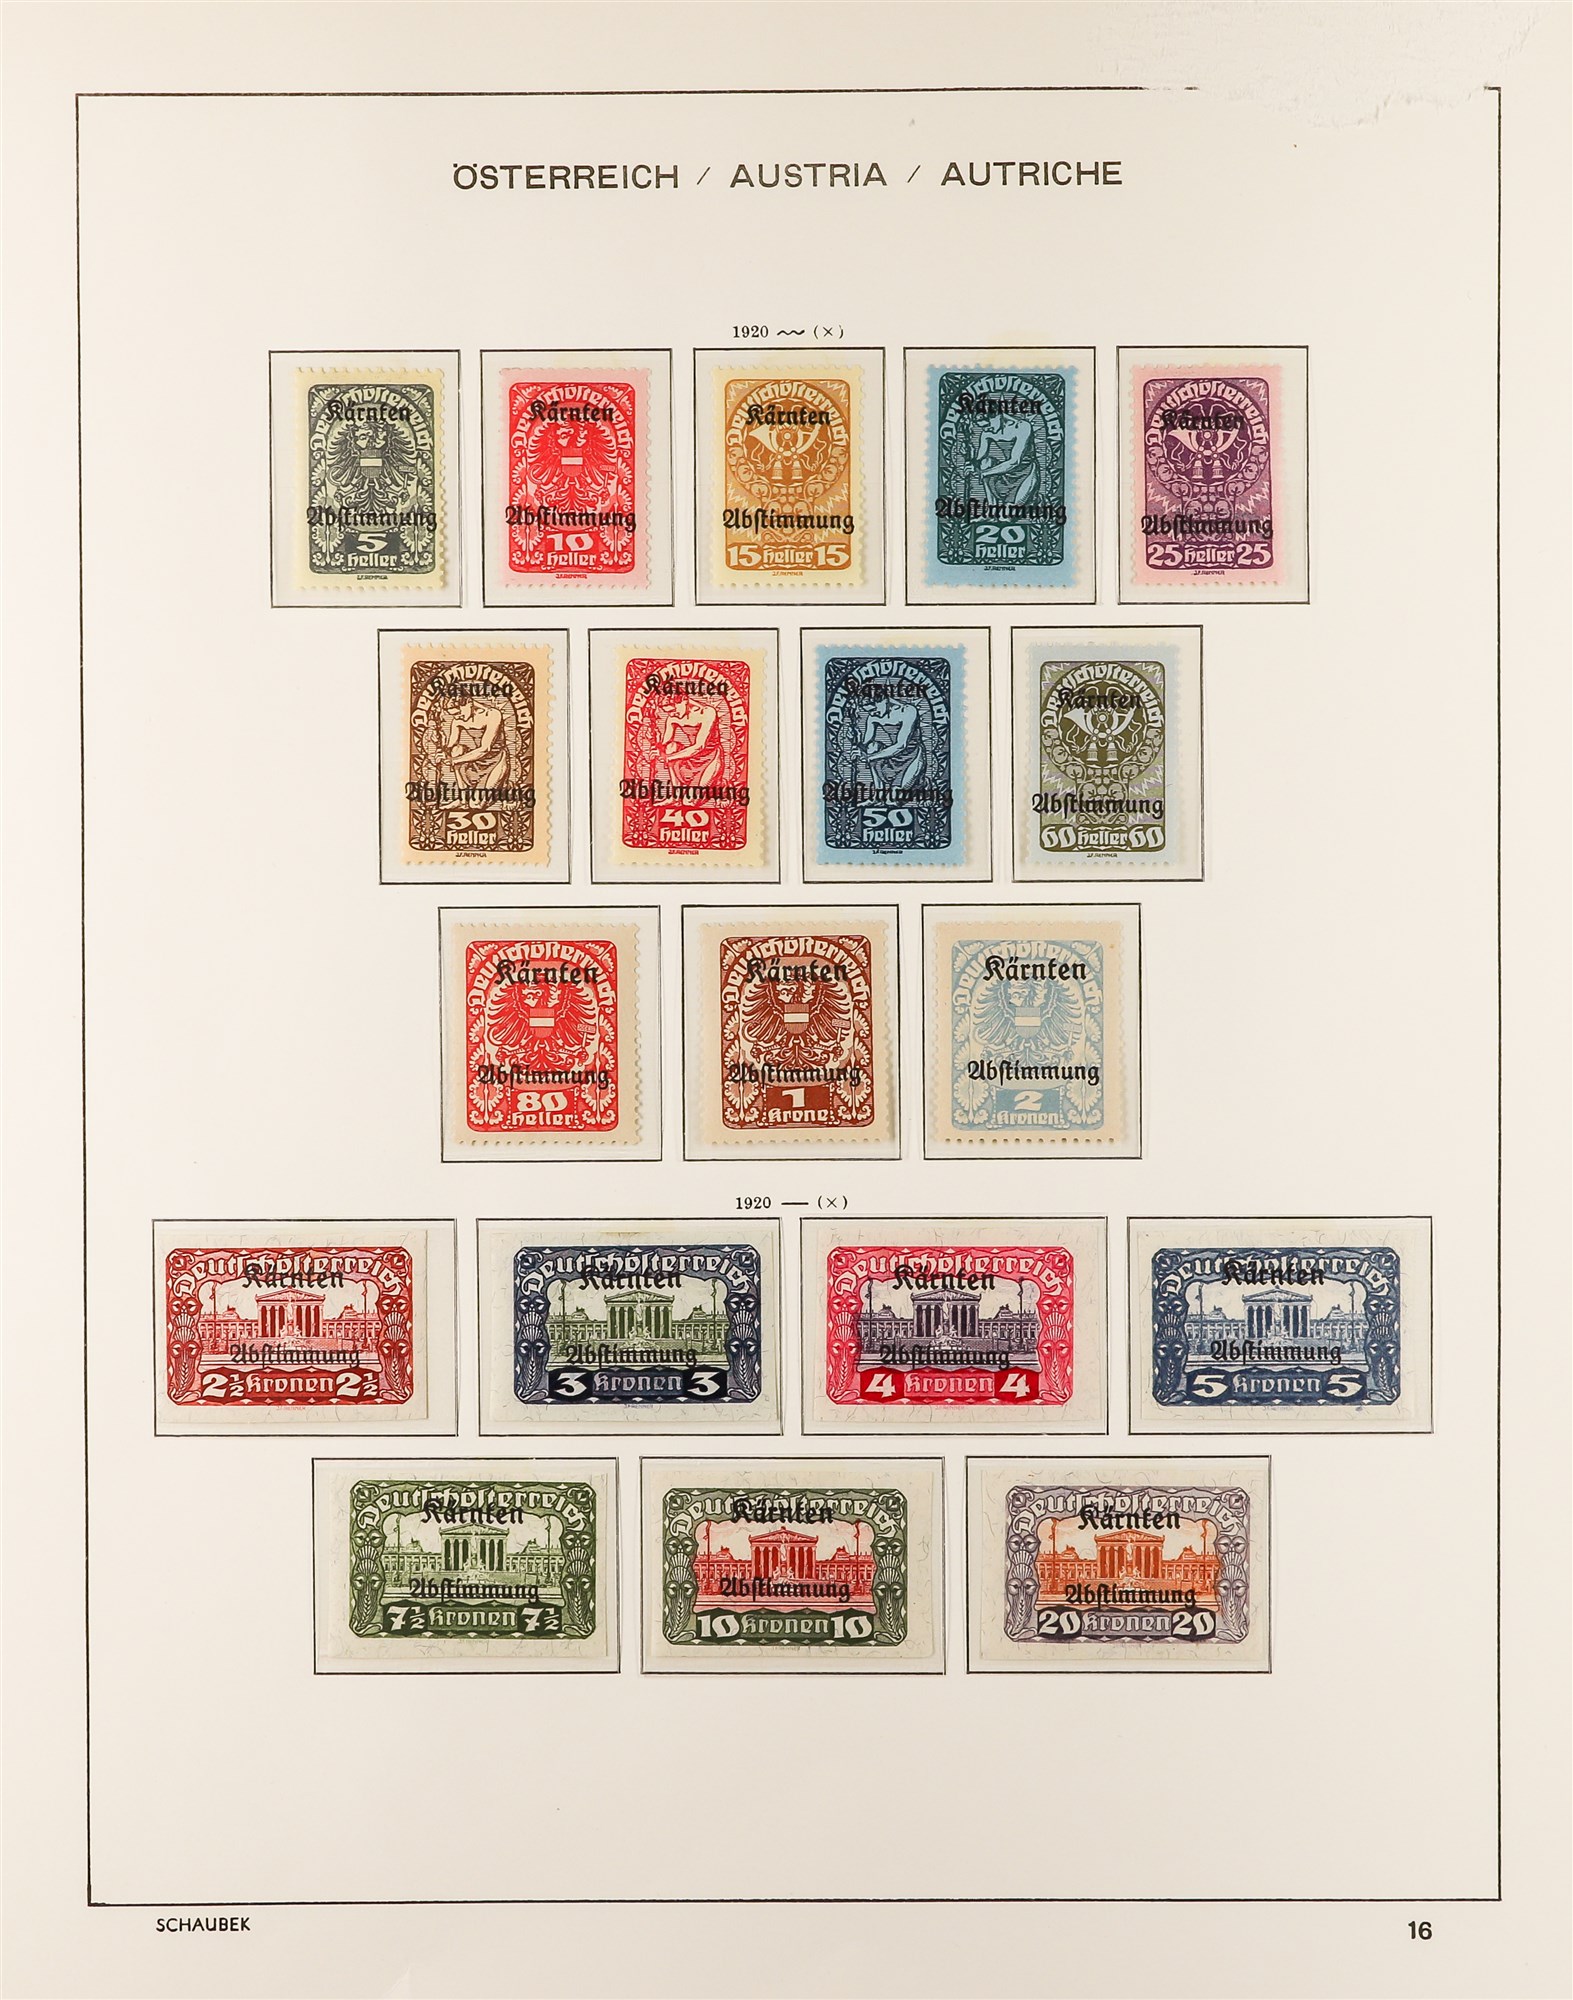 AUSTRIA 1850 - 1937 COLLECTION. of around 1000 mint & used stamps in Schaubek Austria hingeless - Image 16 of 29